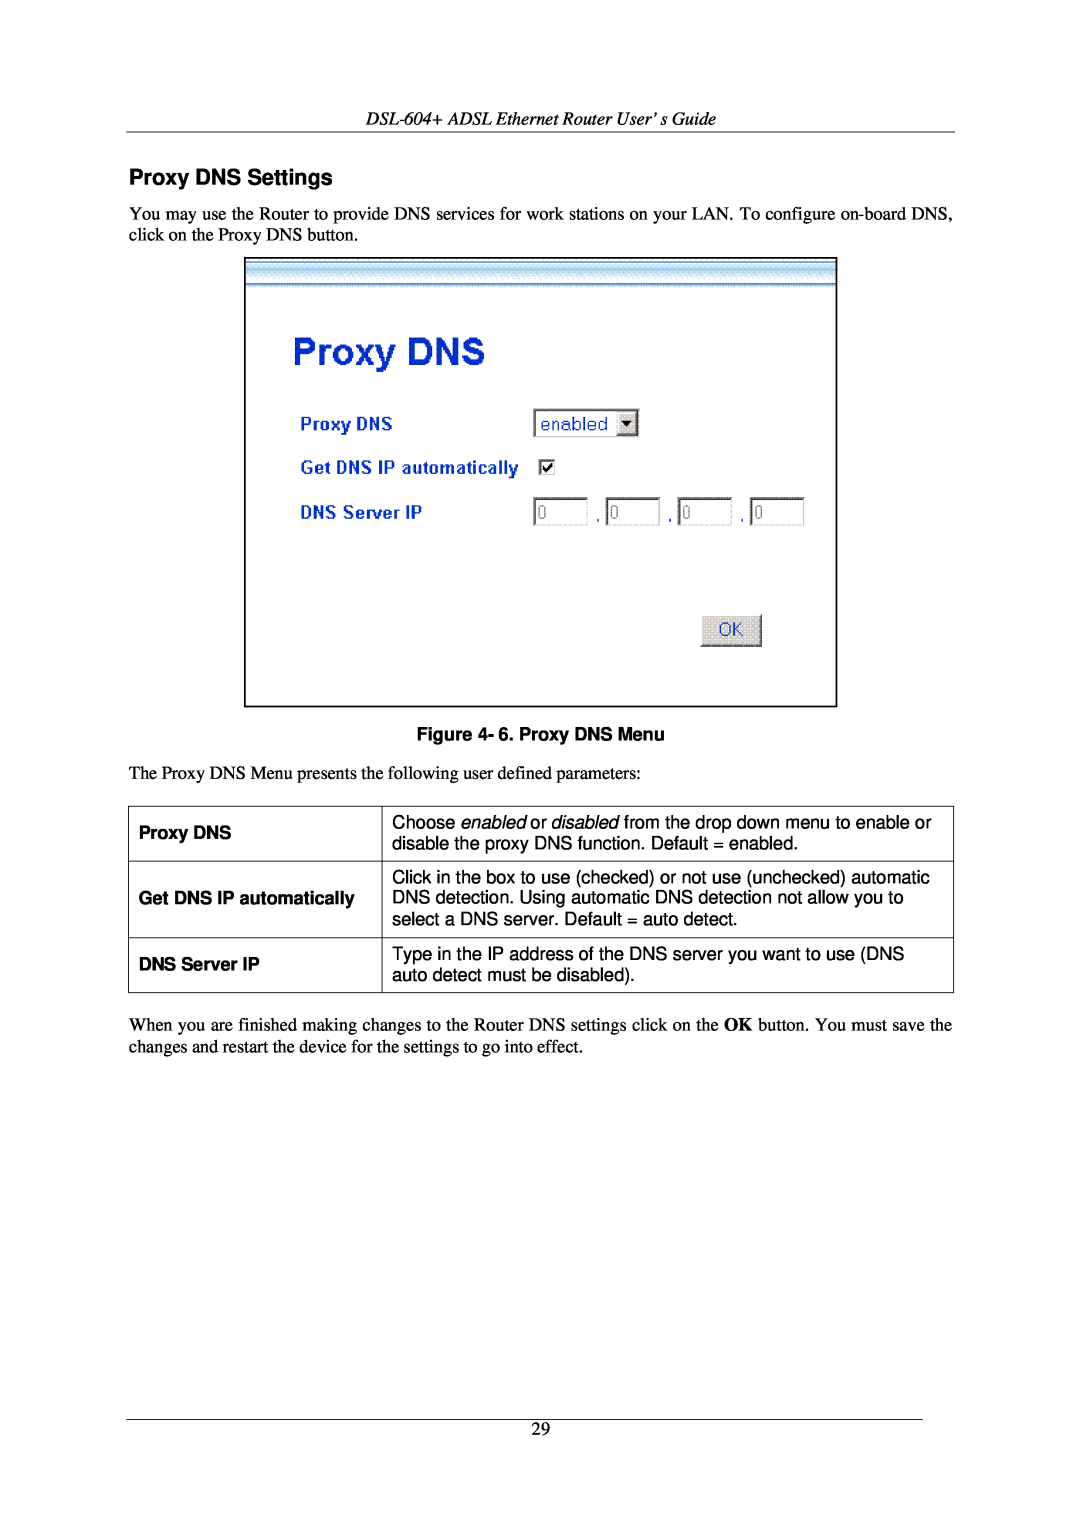 D-Link Proxy DNS Settings, DSL-604+ ADSL Ethernet Router User’s Guide, 6. Proxy DNS Menu, Get DNS IP automatically 